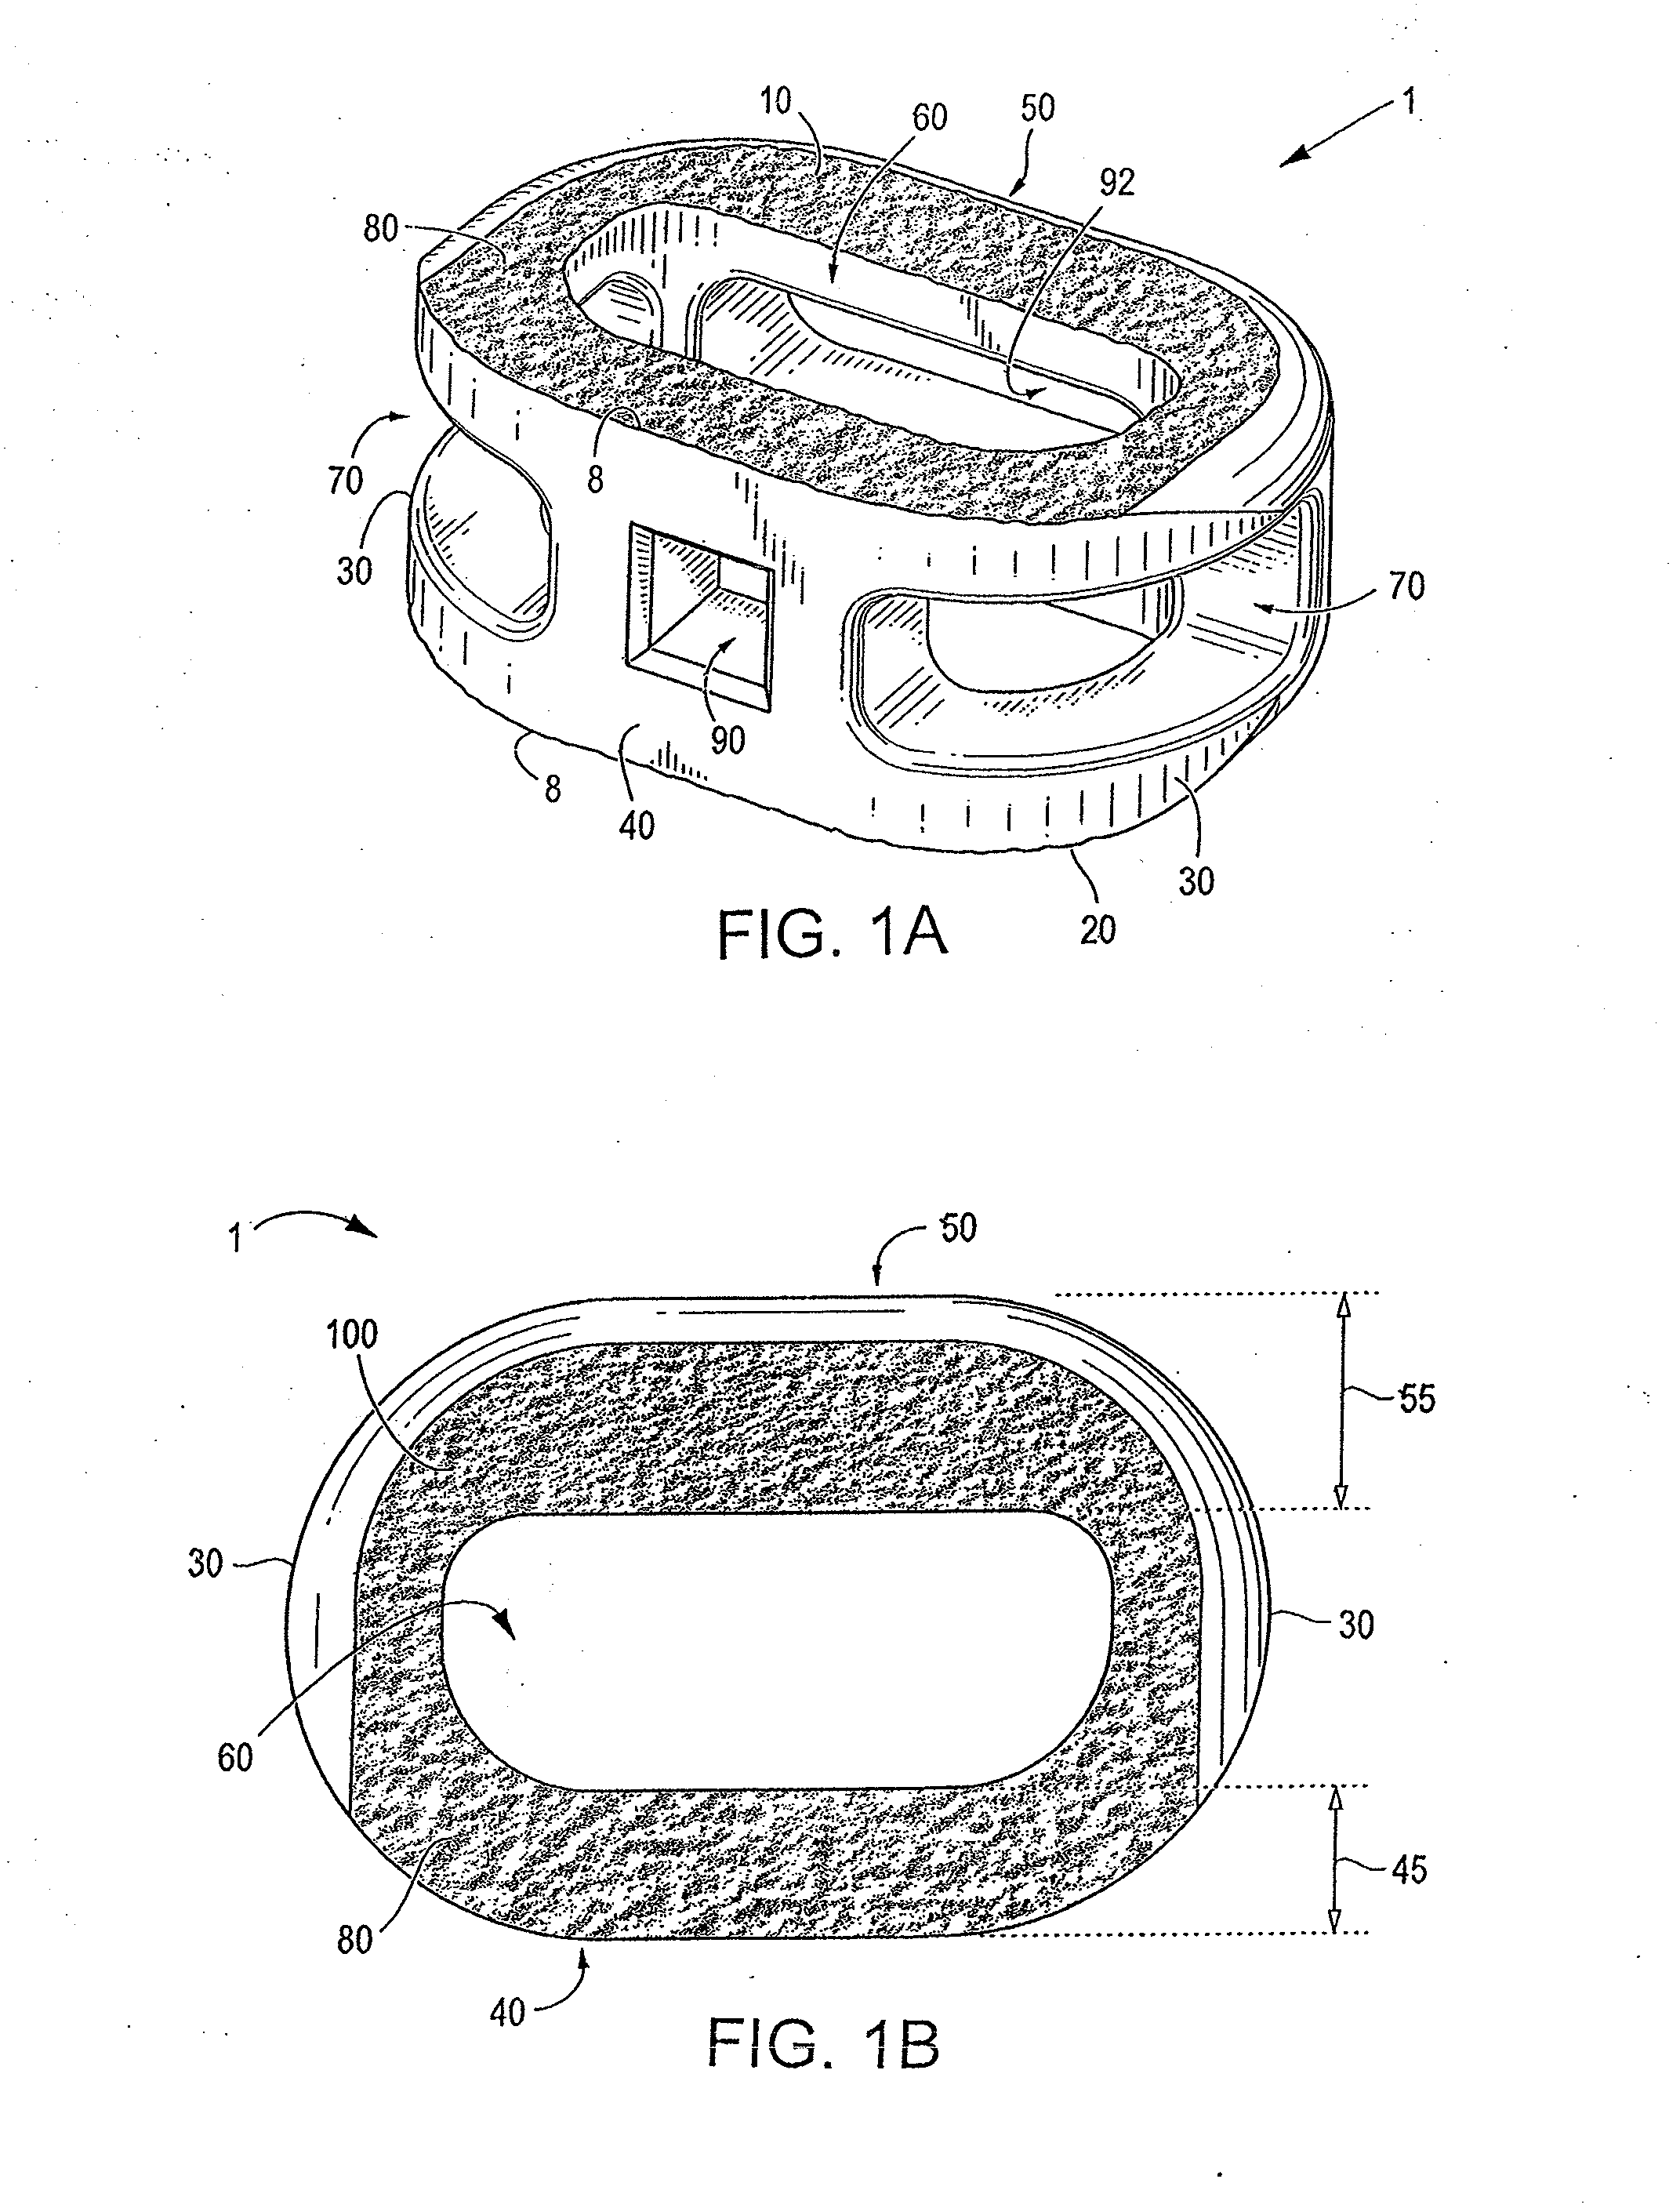 Endplate-preserving spinal implant with an integration plate having a roughened surface topography